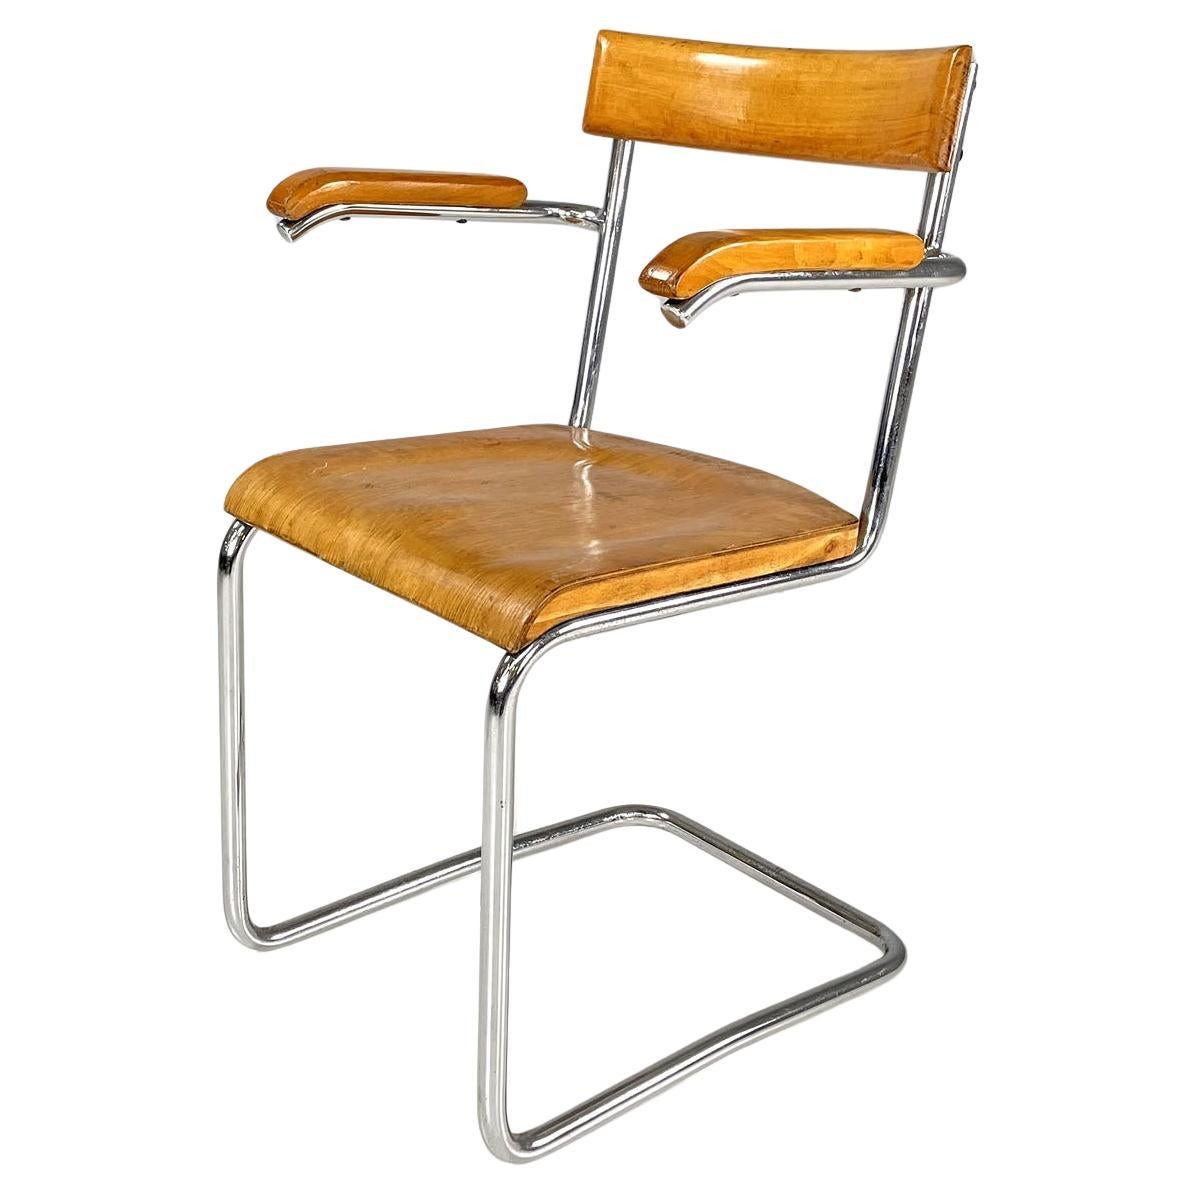 Czech Art Deco wood and chromed steel chair with armrests by Ladislav Zak, 1930s For Sale